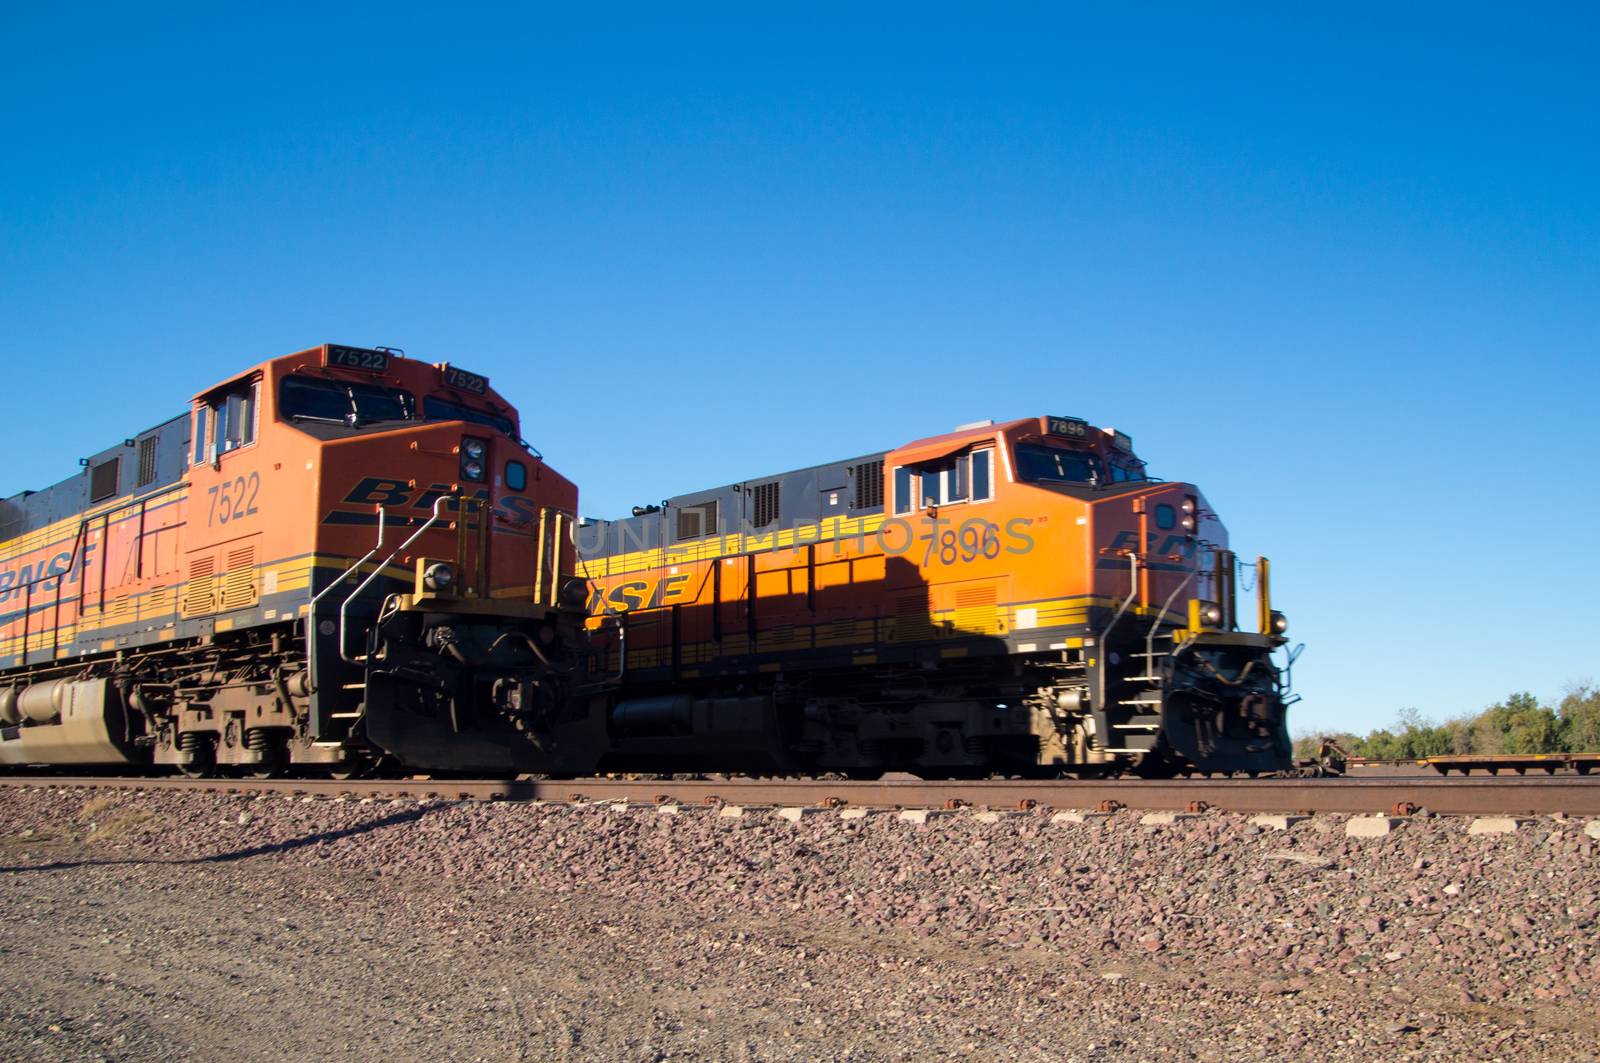 Distinctive orange and yellow Burlington Northern Santa Fe Locomotive freight trains No. 7522 and 7896 on the tracks at the town of Needles, California. Photo taken in February 2013.